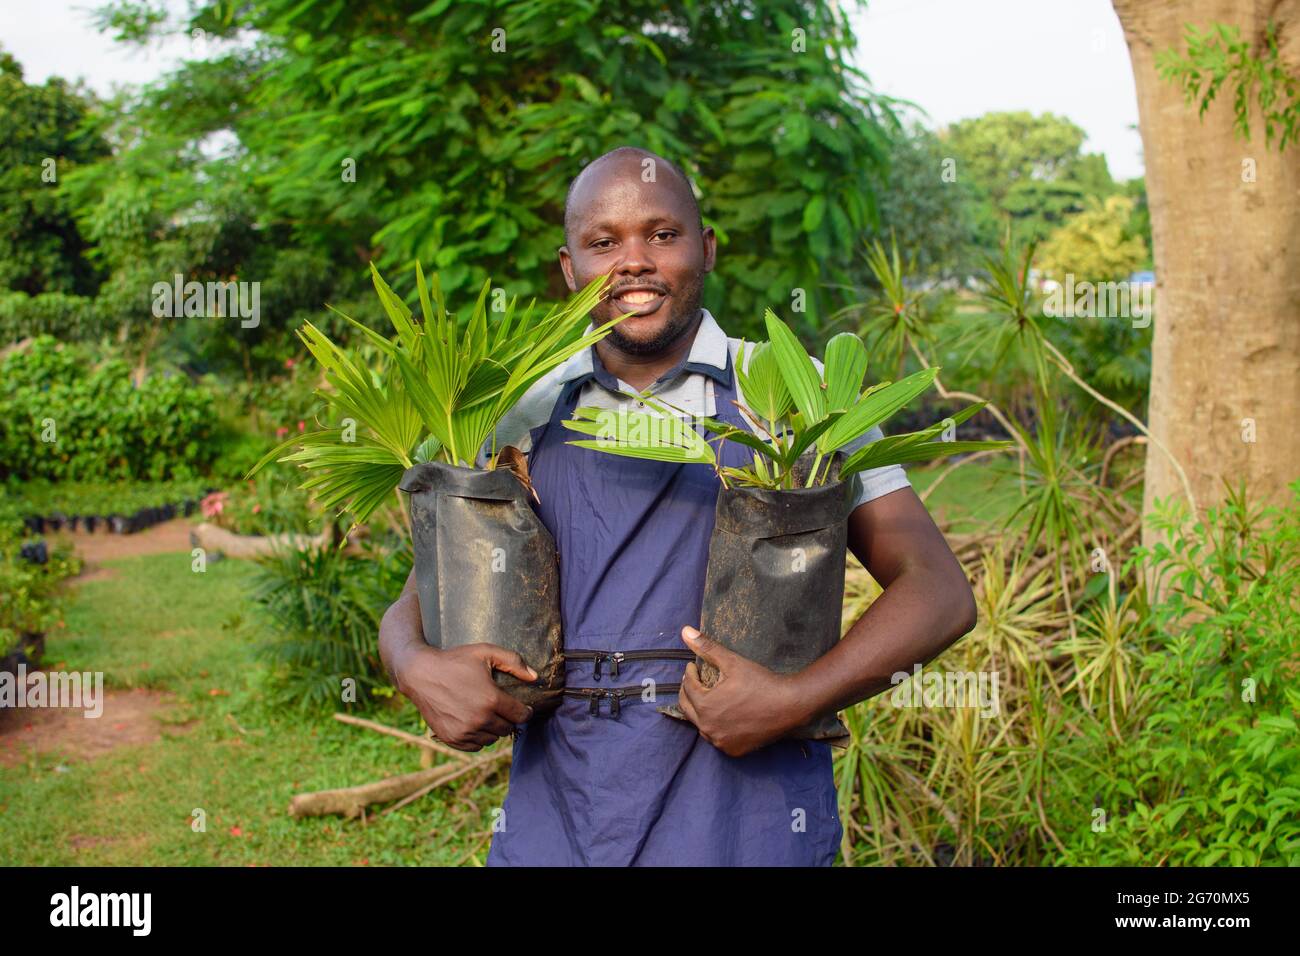 African male gardener, florist or horticulturist wearing an apron and working as he carries two plant bags of plants in a colorful flower garden Stock Photo